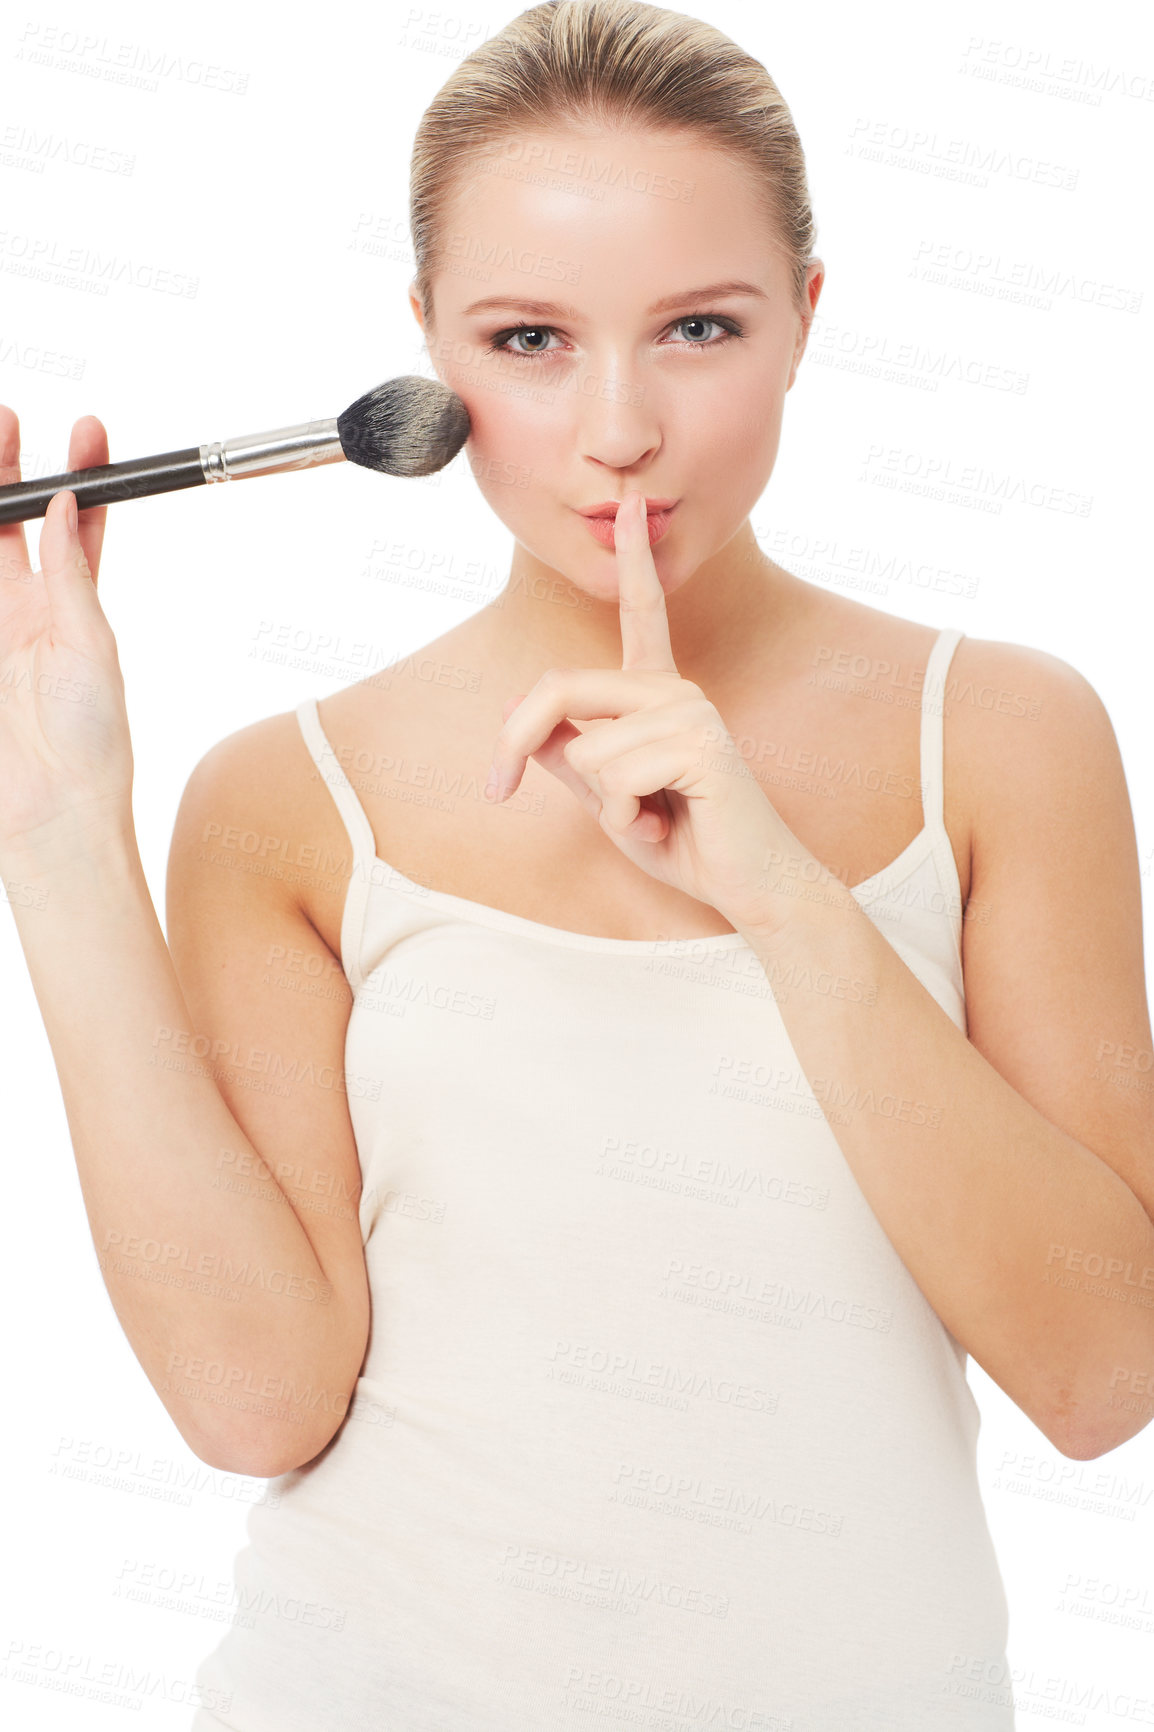 Buy stock photo A pretty woman putting a finger to her lips while applying blush to her face